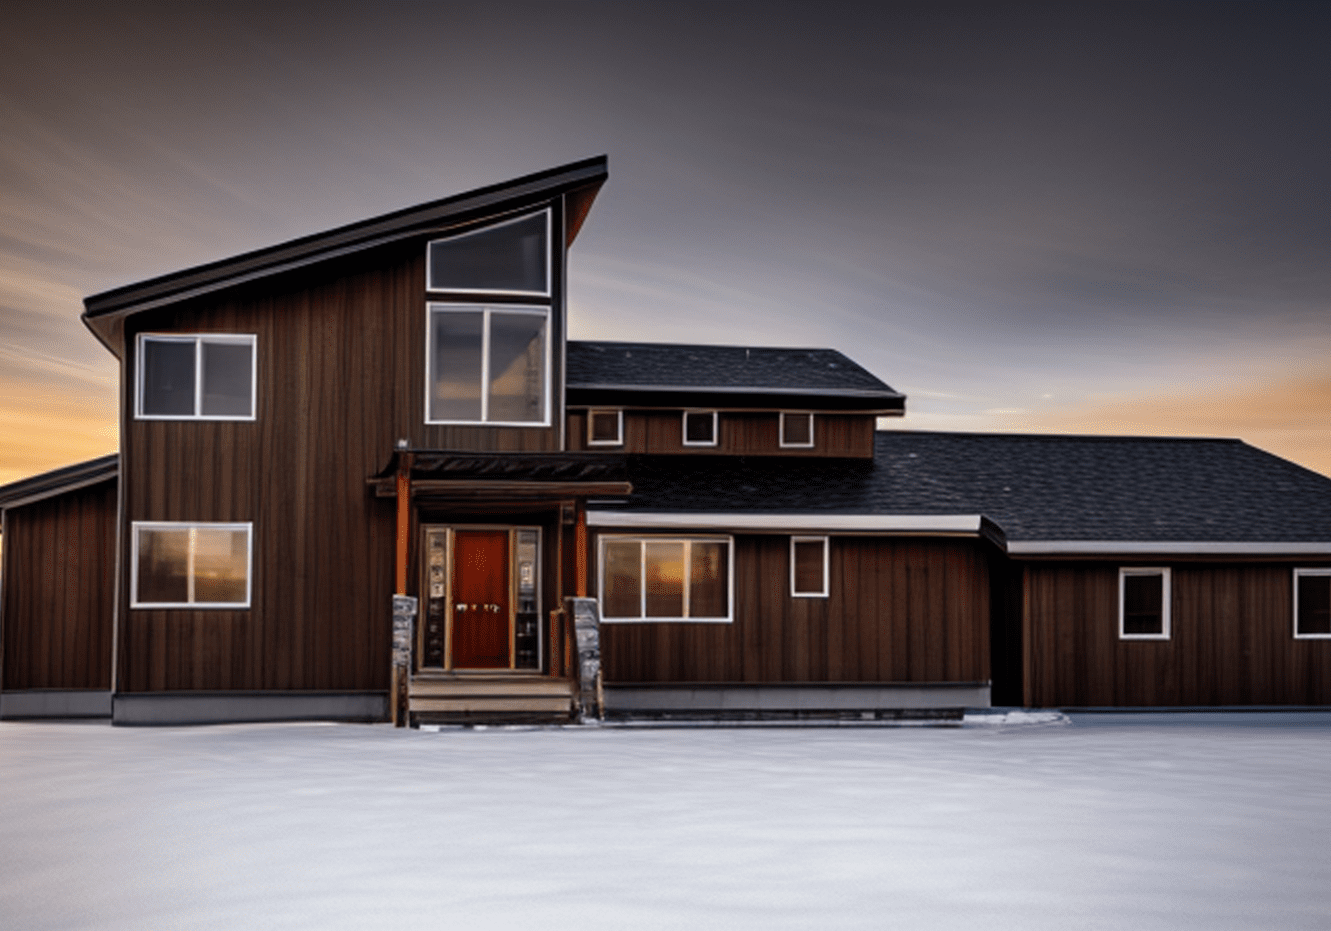 Modern wooden house at twilight with snow-covered ground and dramatic sky.